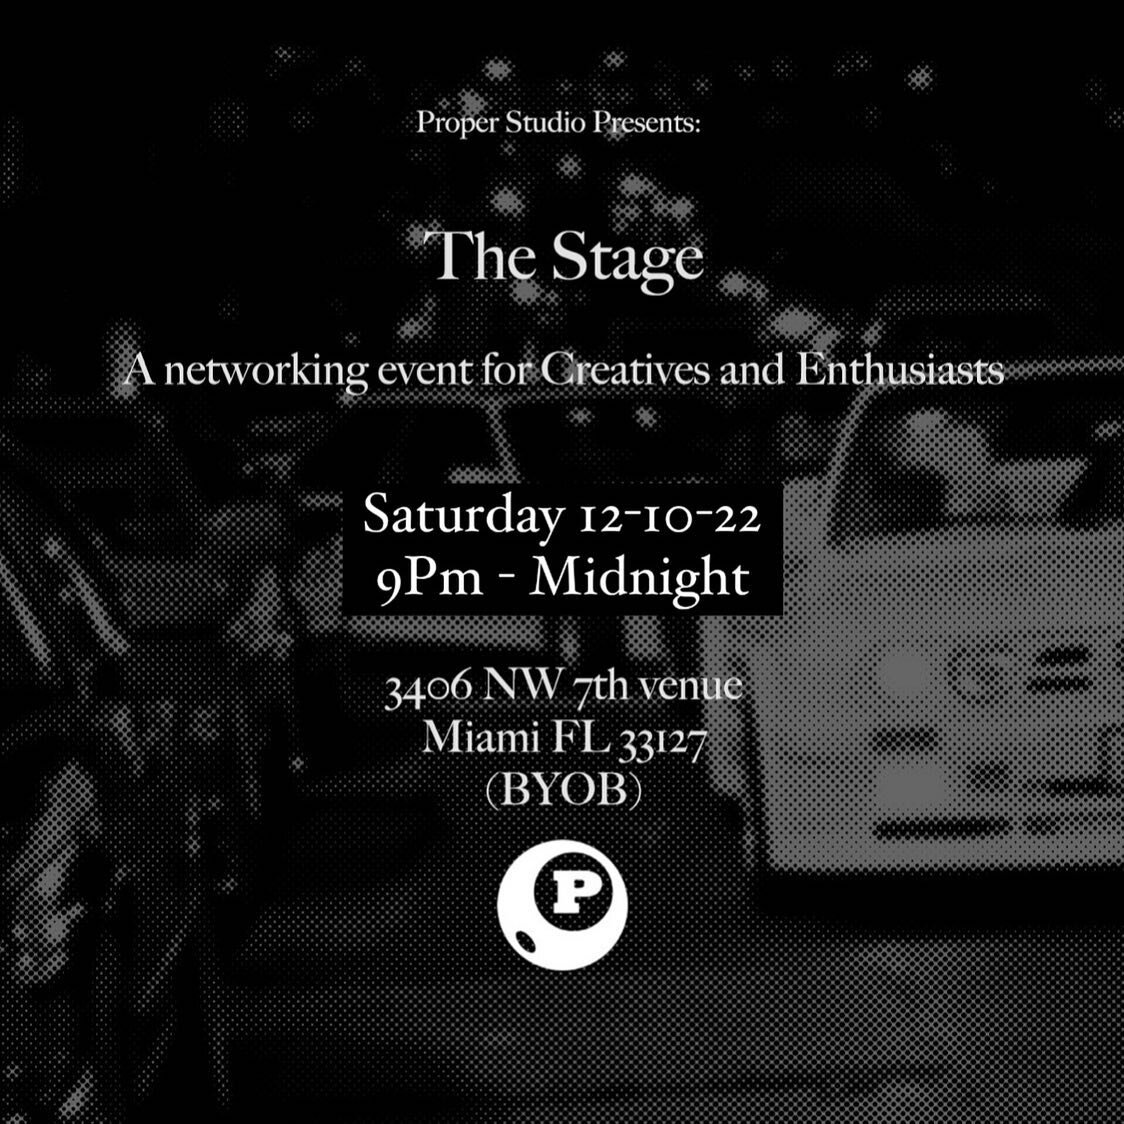 Proper Presents: The Stage

3406 NW 7TH AVE  Miami, FL 33127 

Networking event for enthusiasts and creatives. Join us 12/10/22 9PM- 12AM. Network and catch a vibe. This event is BYOB. 

Vendors, Artist, DJs, Performers, Sponsors: Interested in being